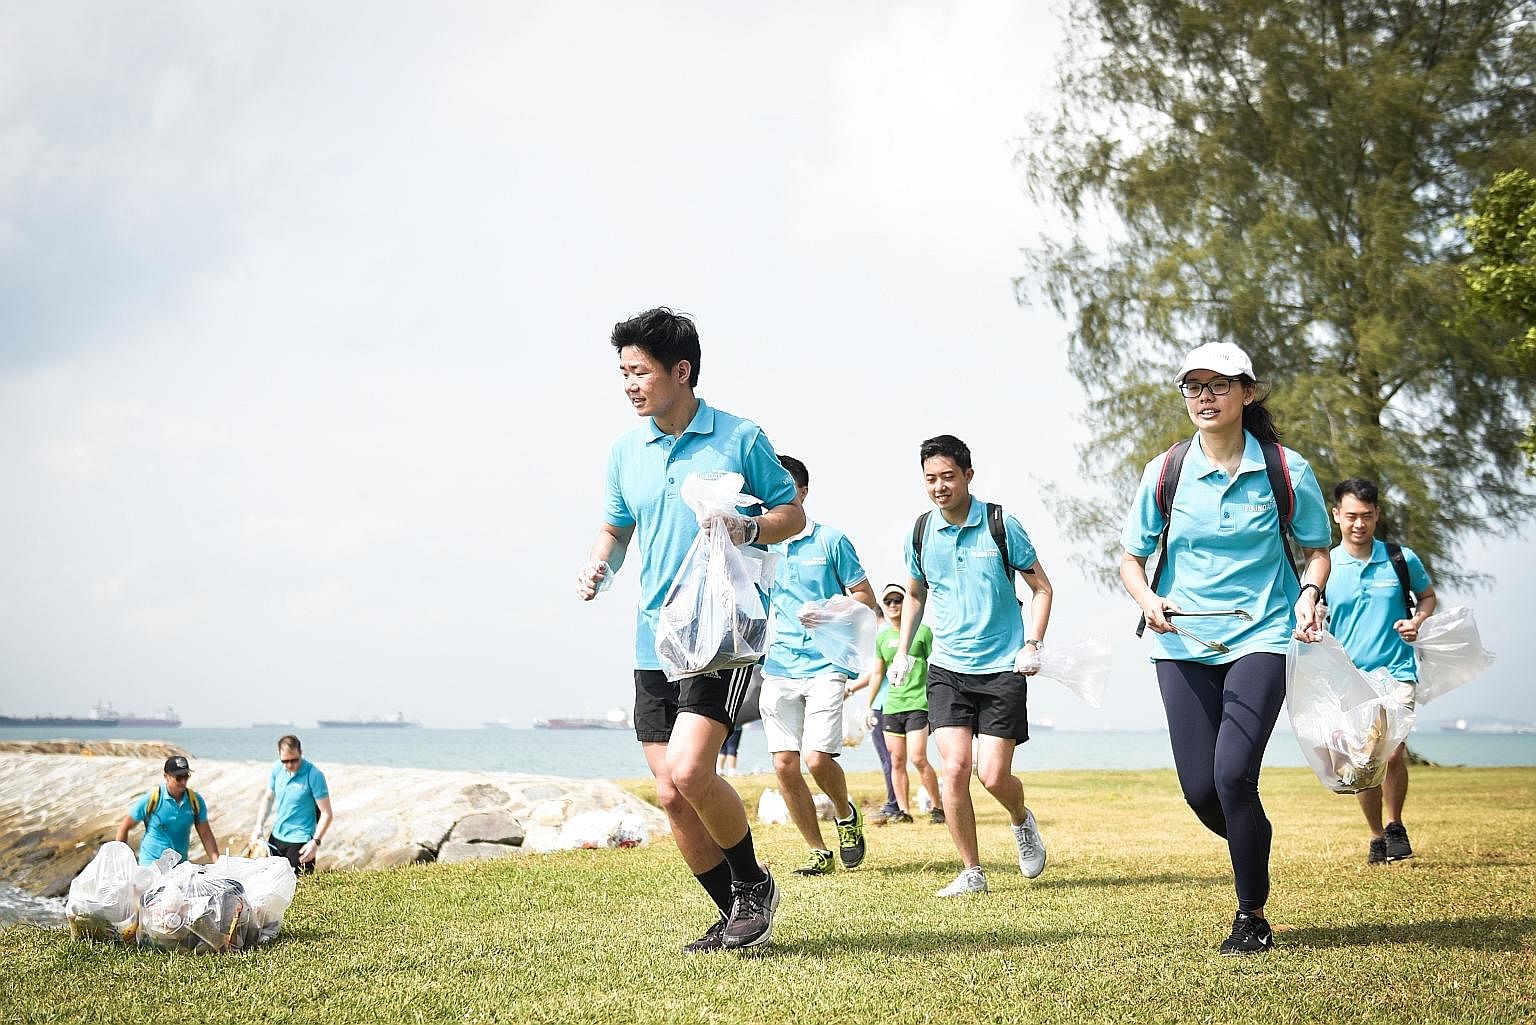 Mr Lee Leong Hui (in front) plogging at the East Coast beach with his colleagues from property firm Lendlease last Thursday, as part of the company's annual community day. The term "plogging" is a mash-up of the word "jogging" and the Swedish words "